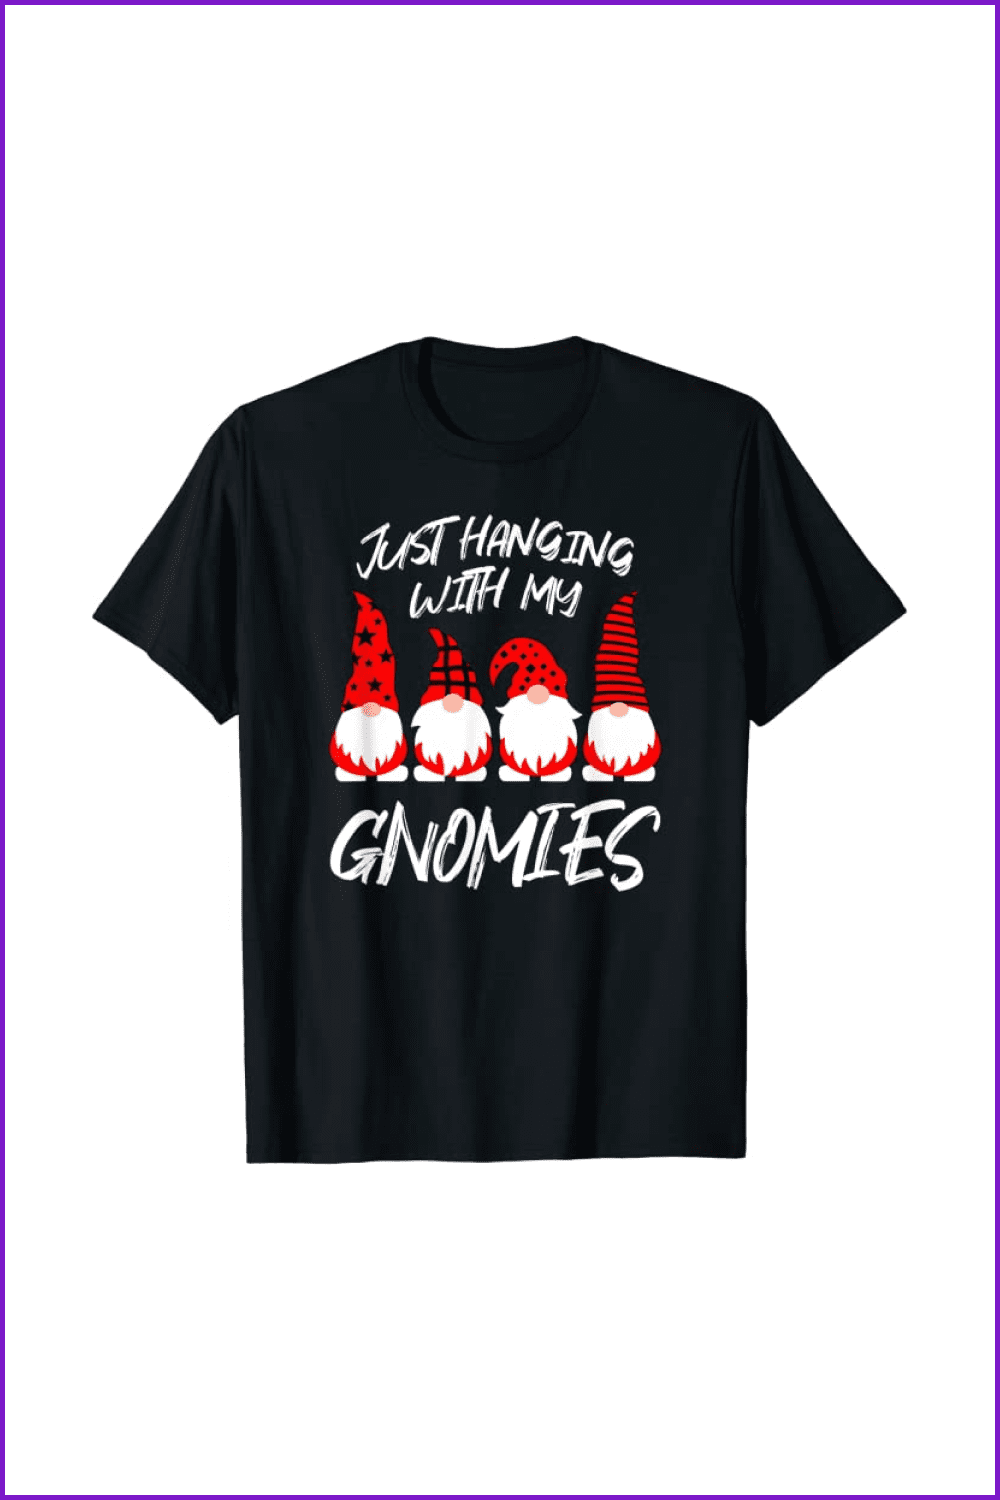 Black t-shirt with a four funny gnomes.